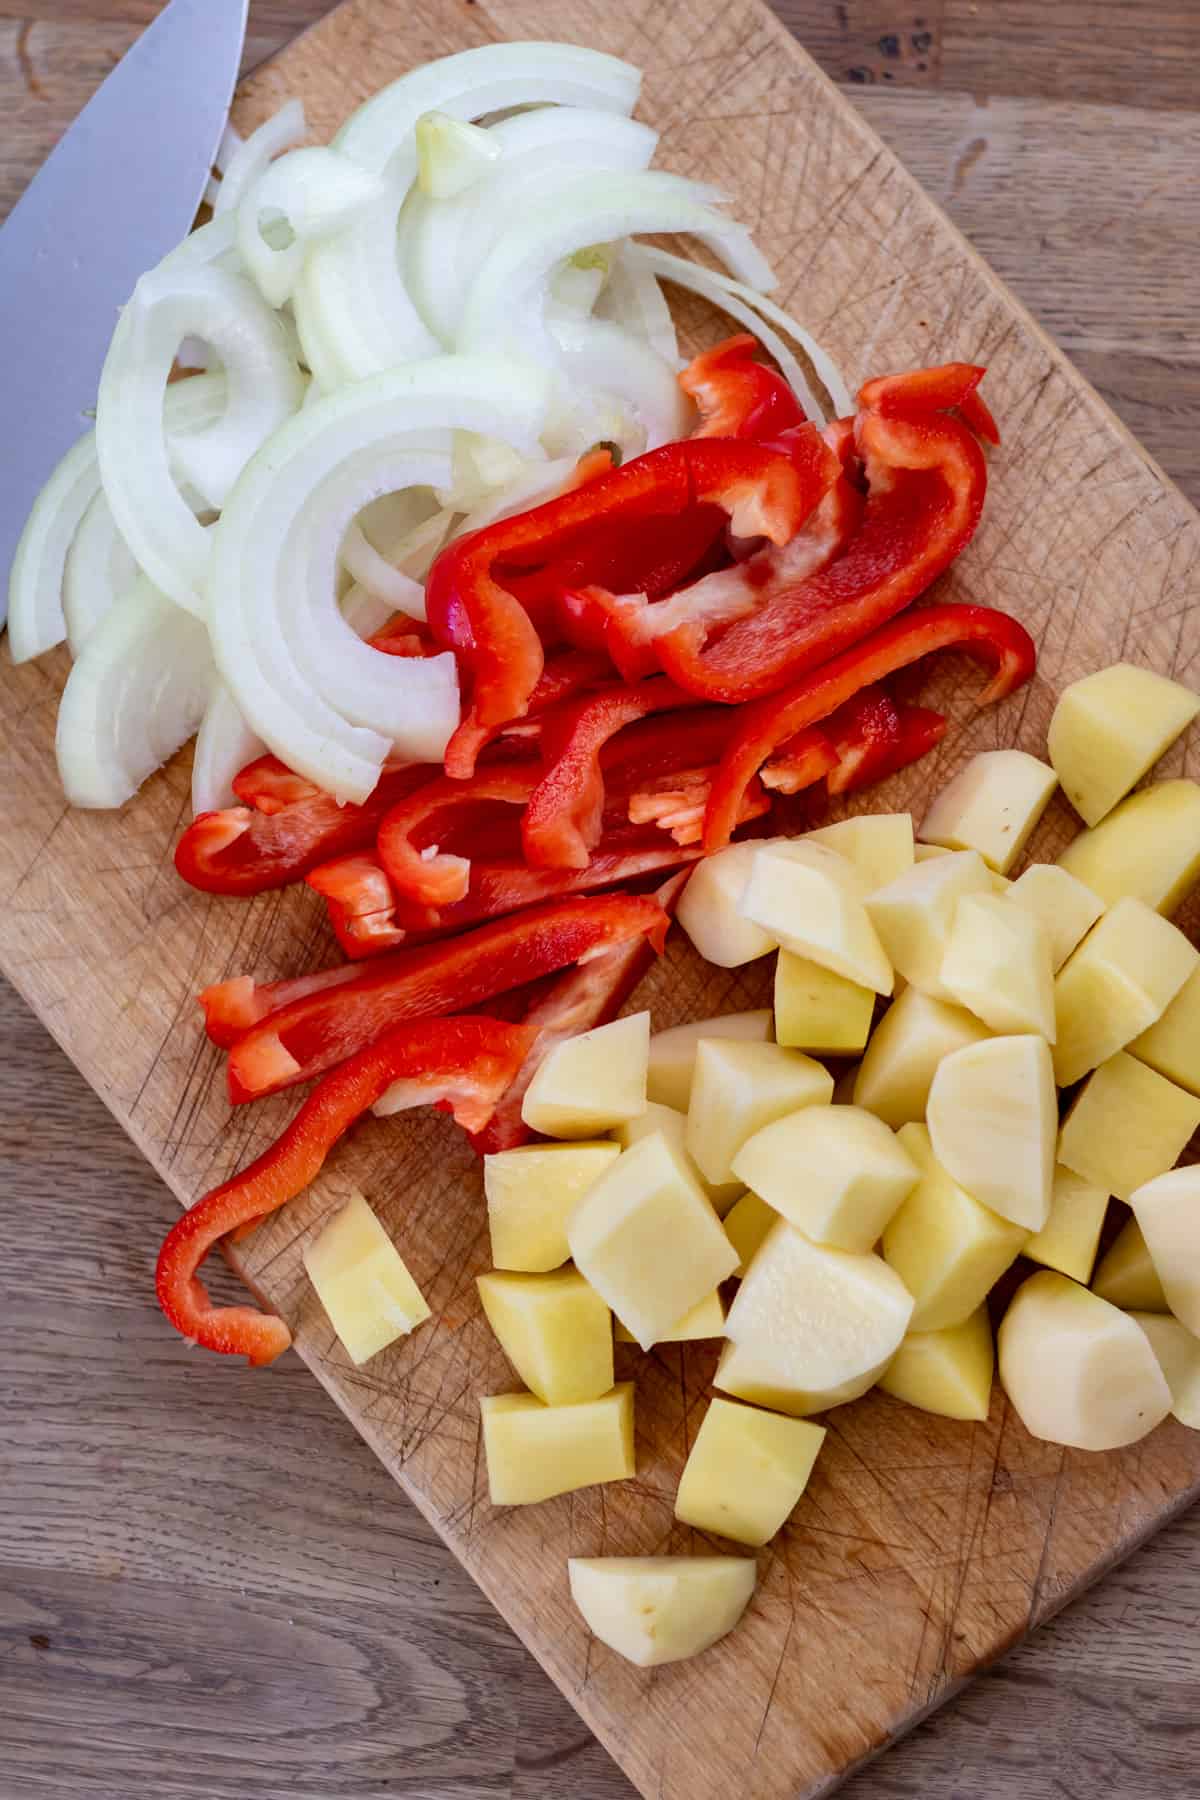 Cutting board with sliced onions, peppers and diced potatoes.